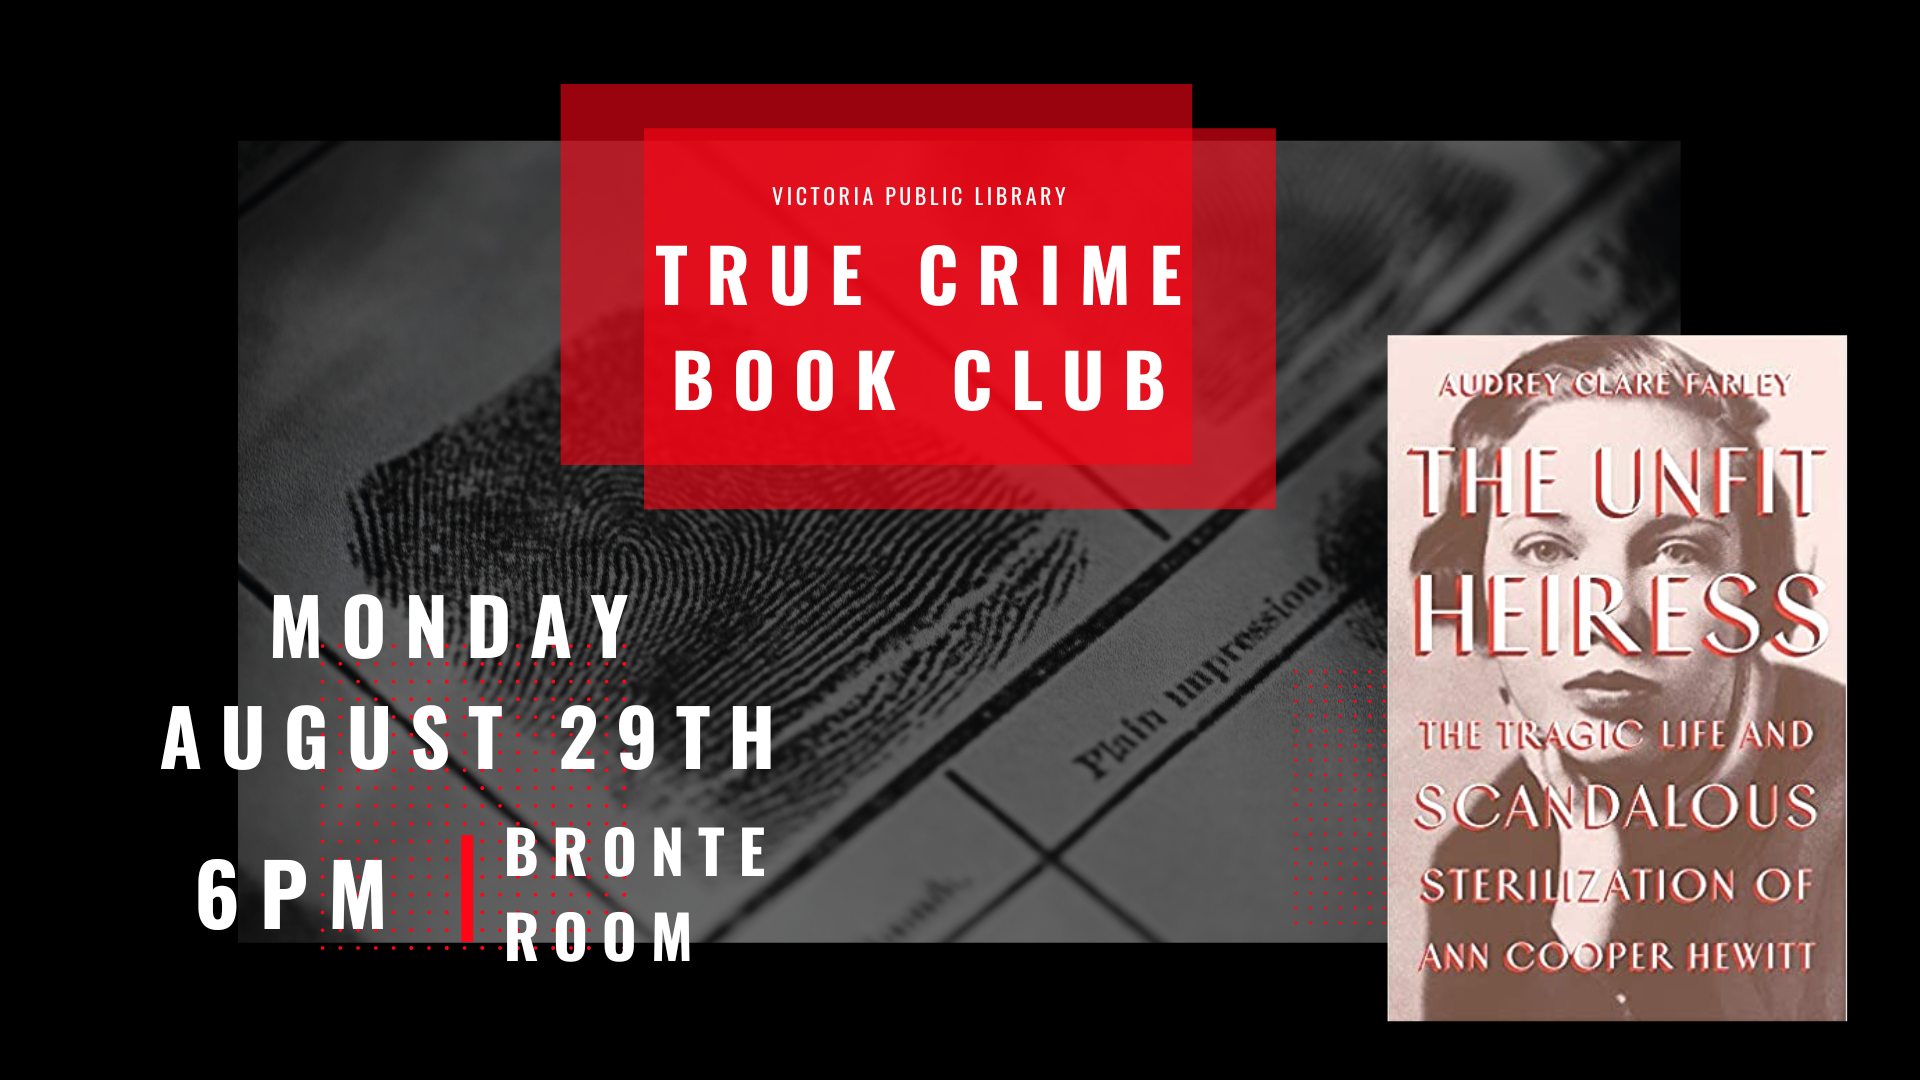 True Crime Book Club, August 29 at 6pm, The Unfit Heiress by Audrey Clare Farley